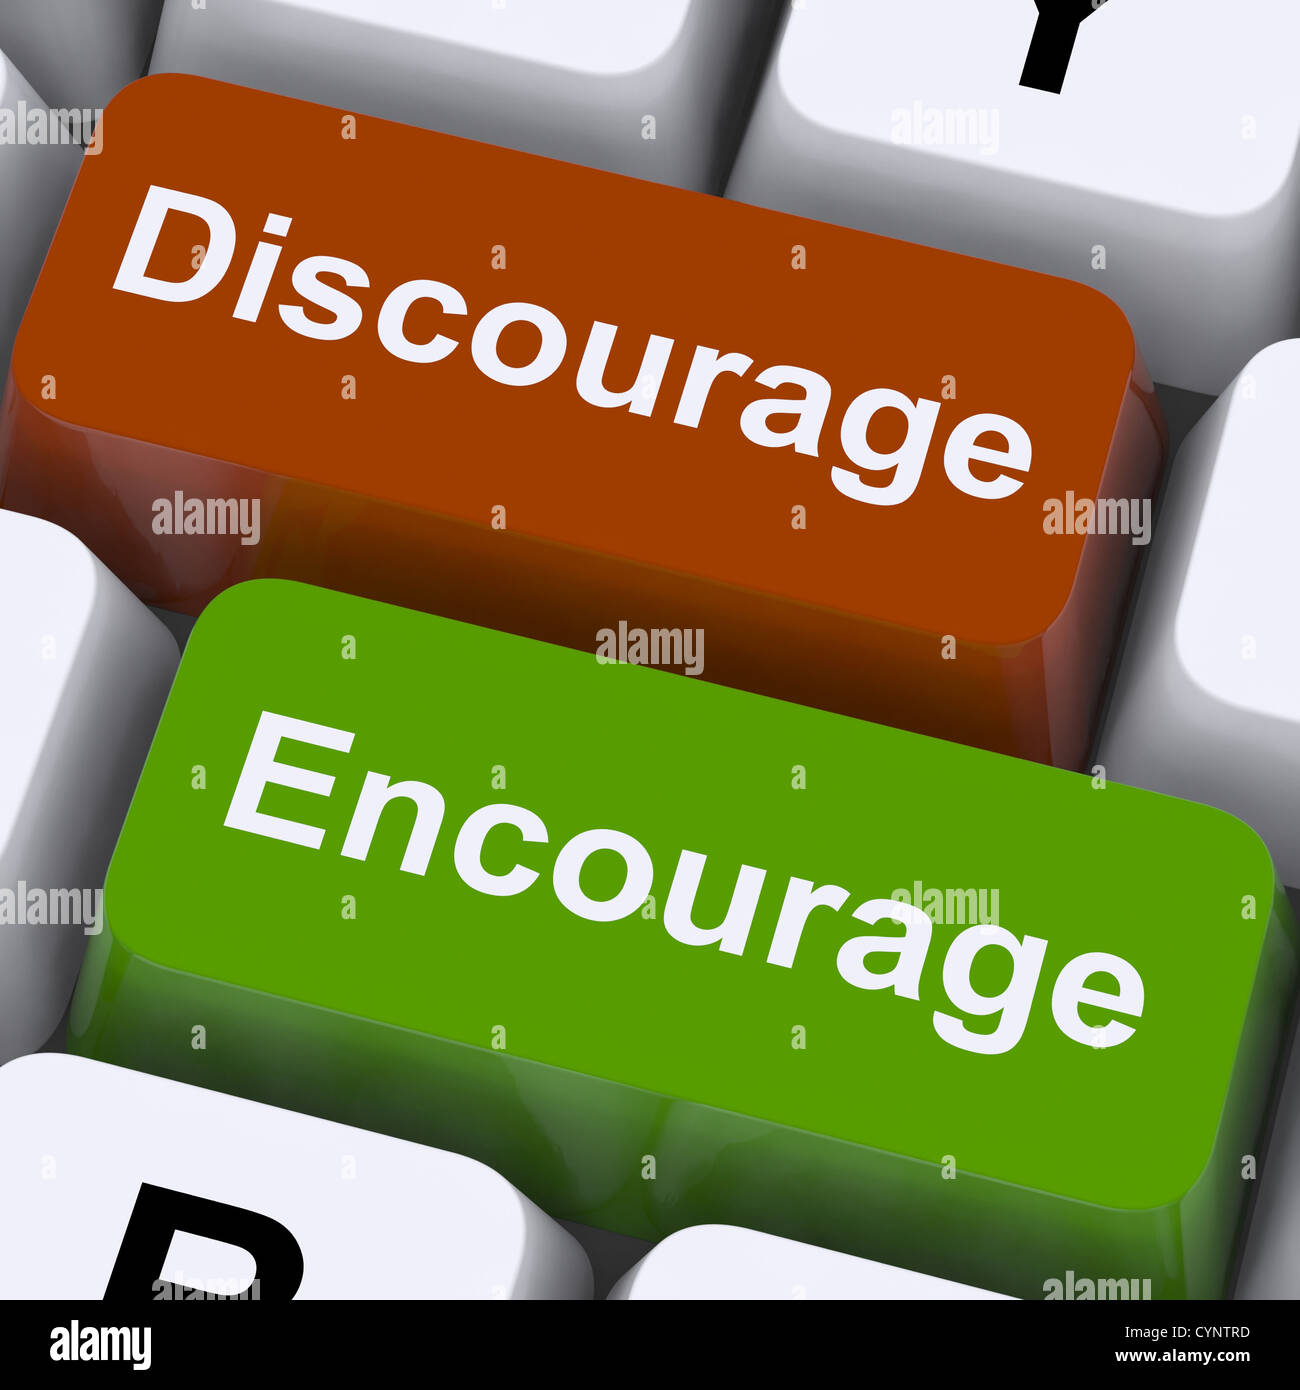 Discourage Or Encourage Keys To Either Motivate Or Deter Stock Photo